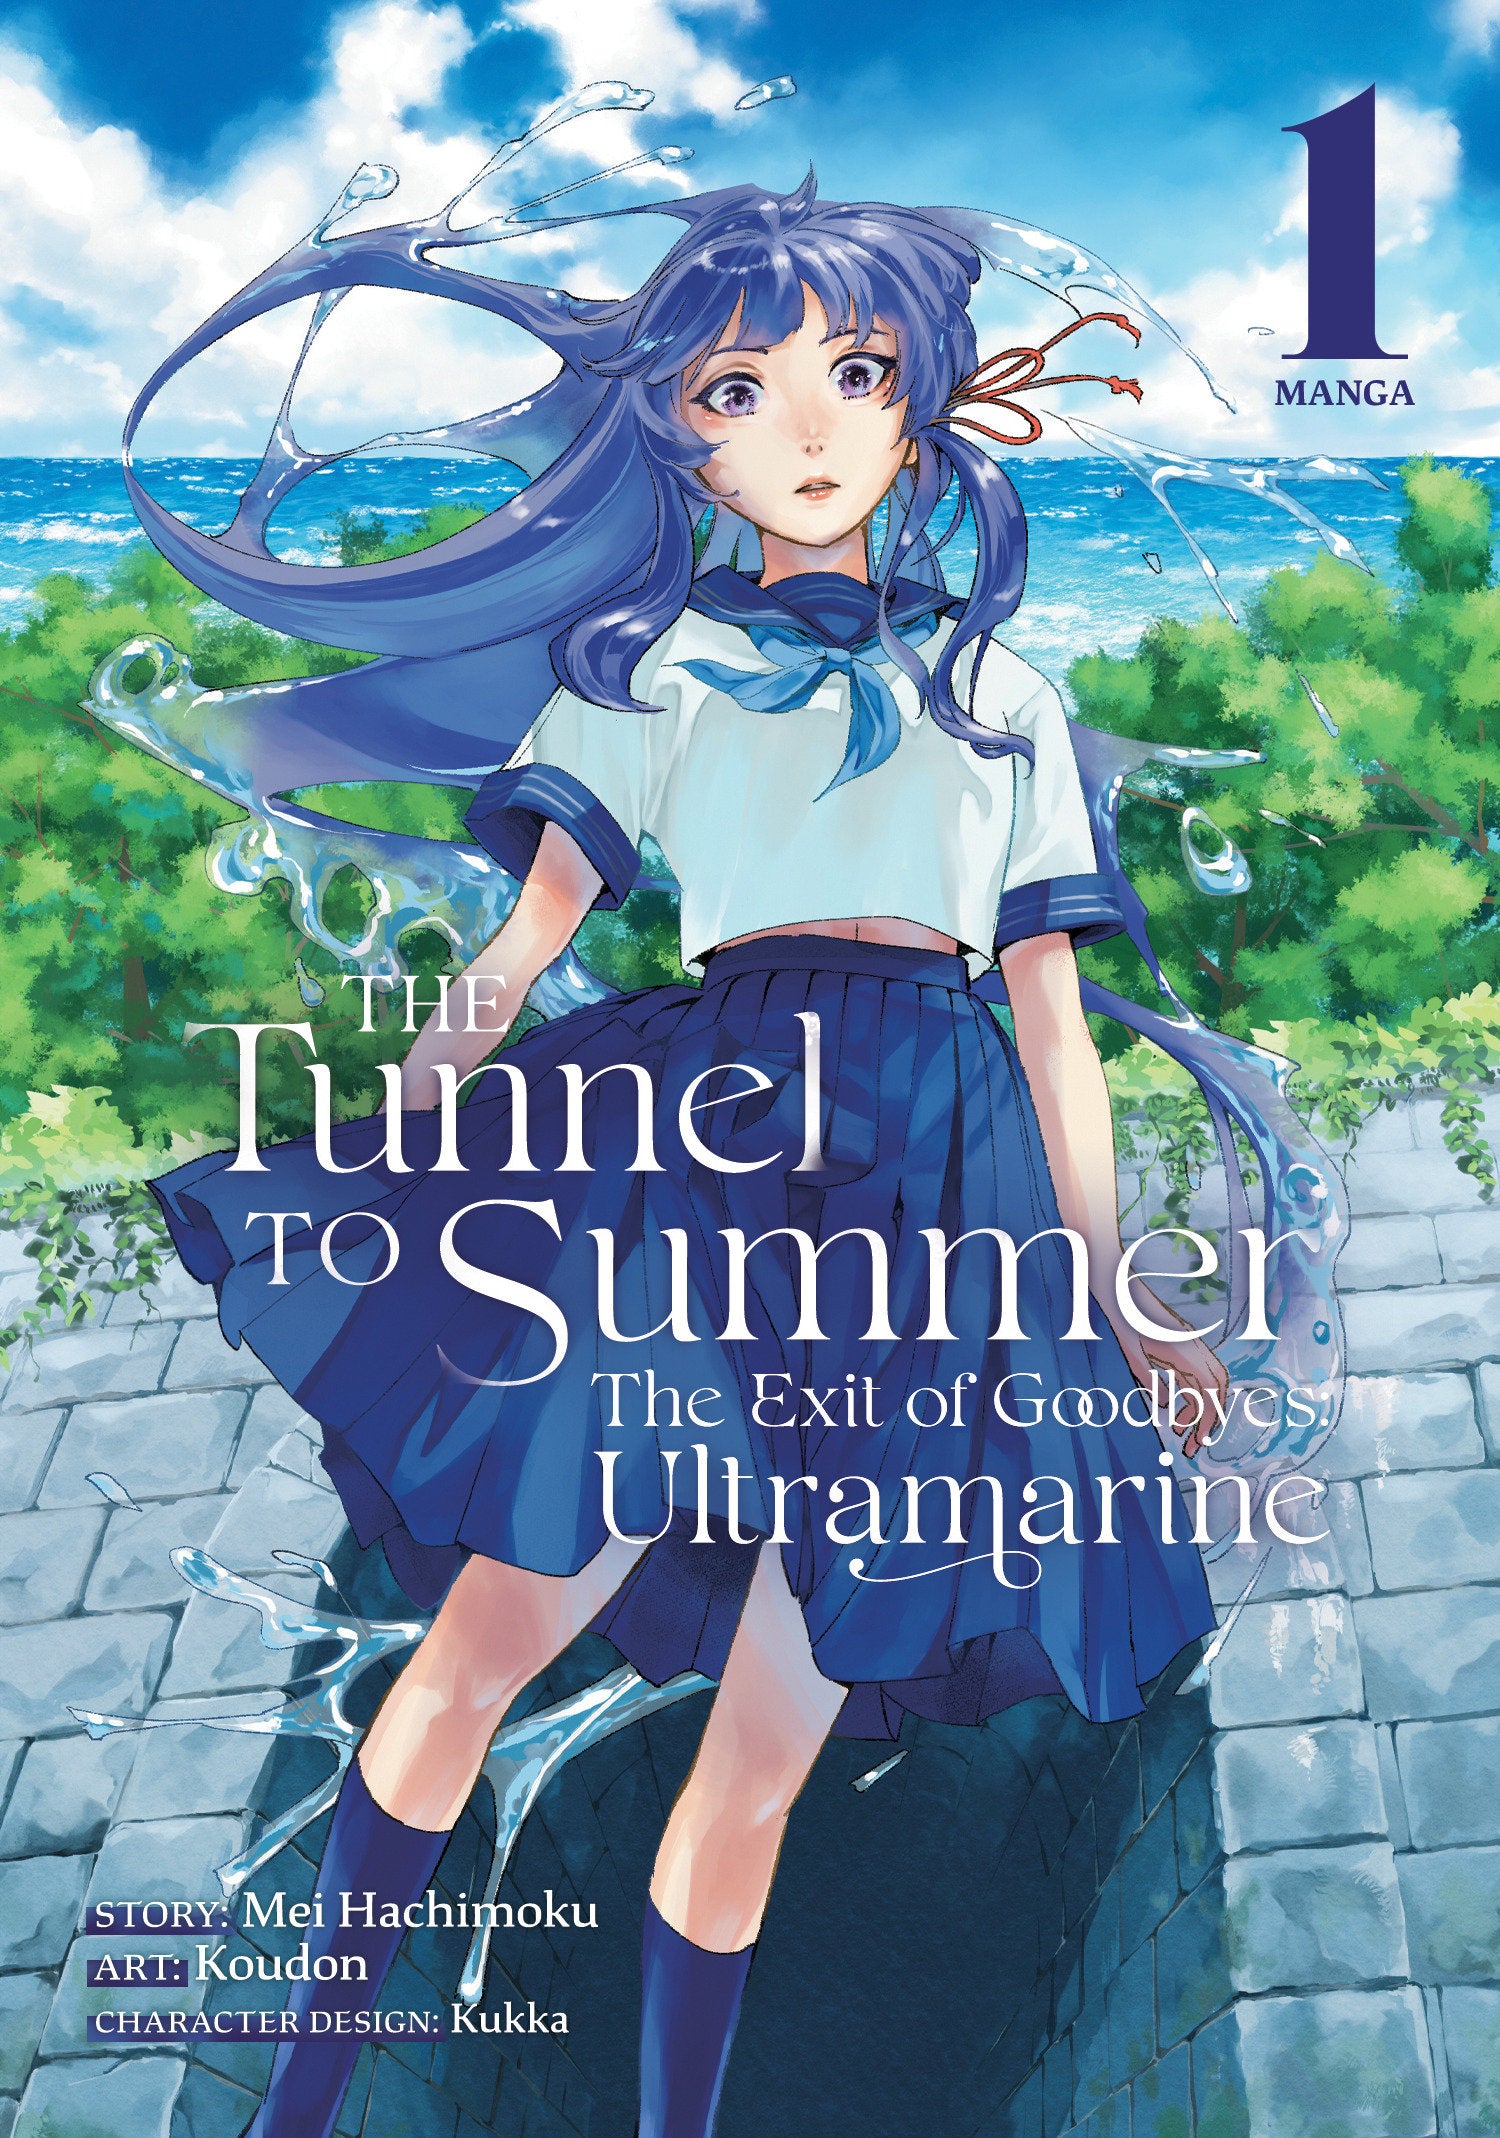 The Tunnel to Summer, the Exit of Goodbyes: Ultramarine (Manga) Vol. 01